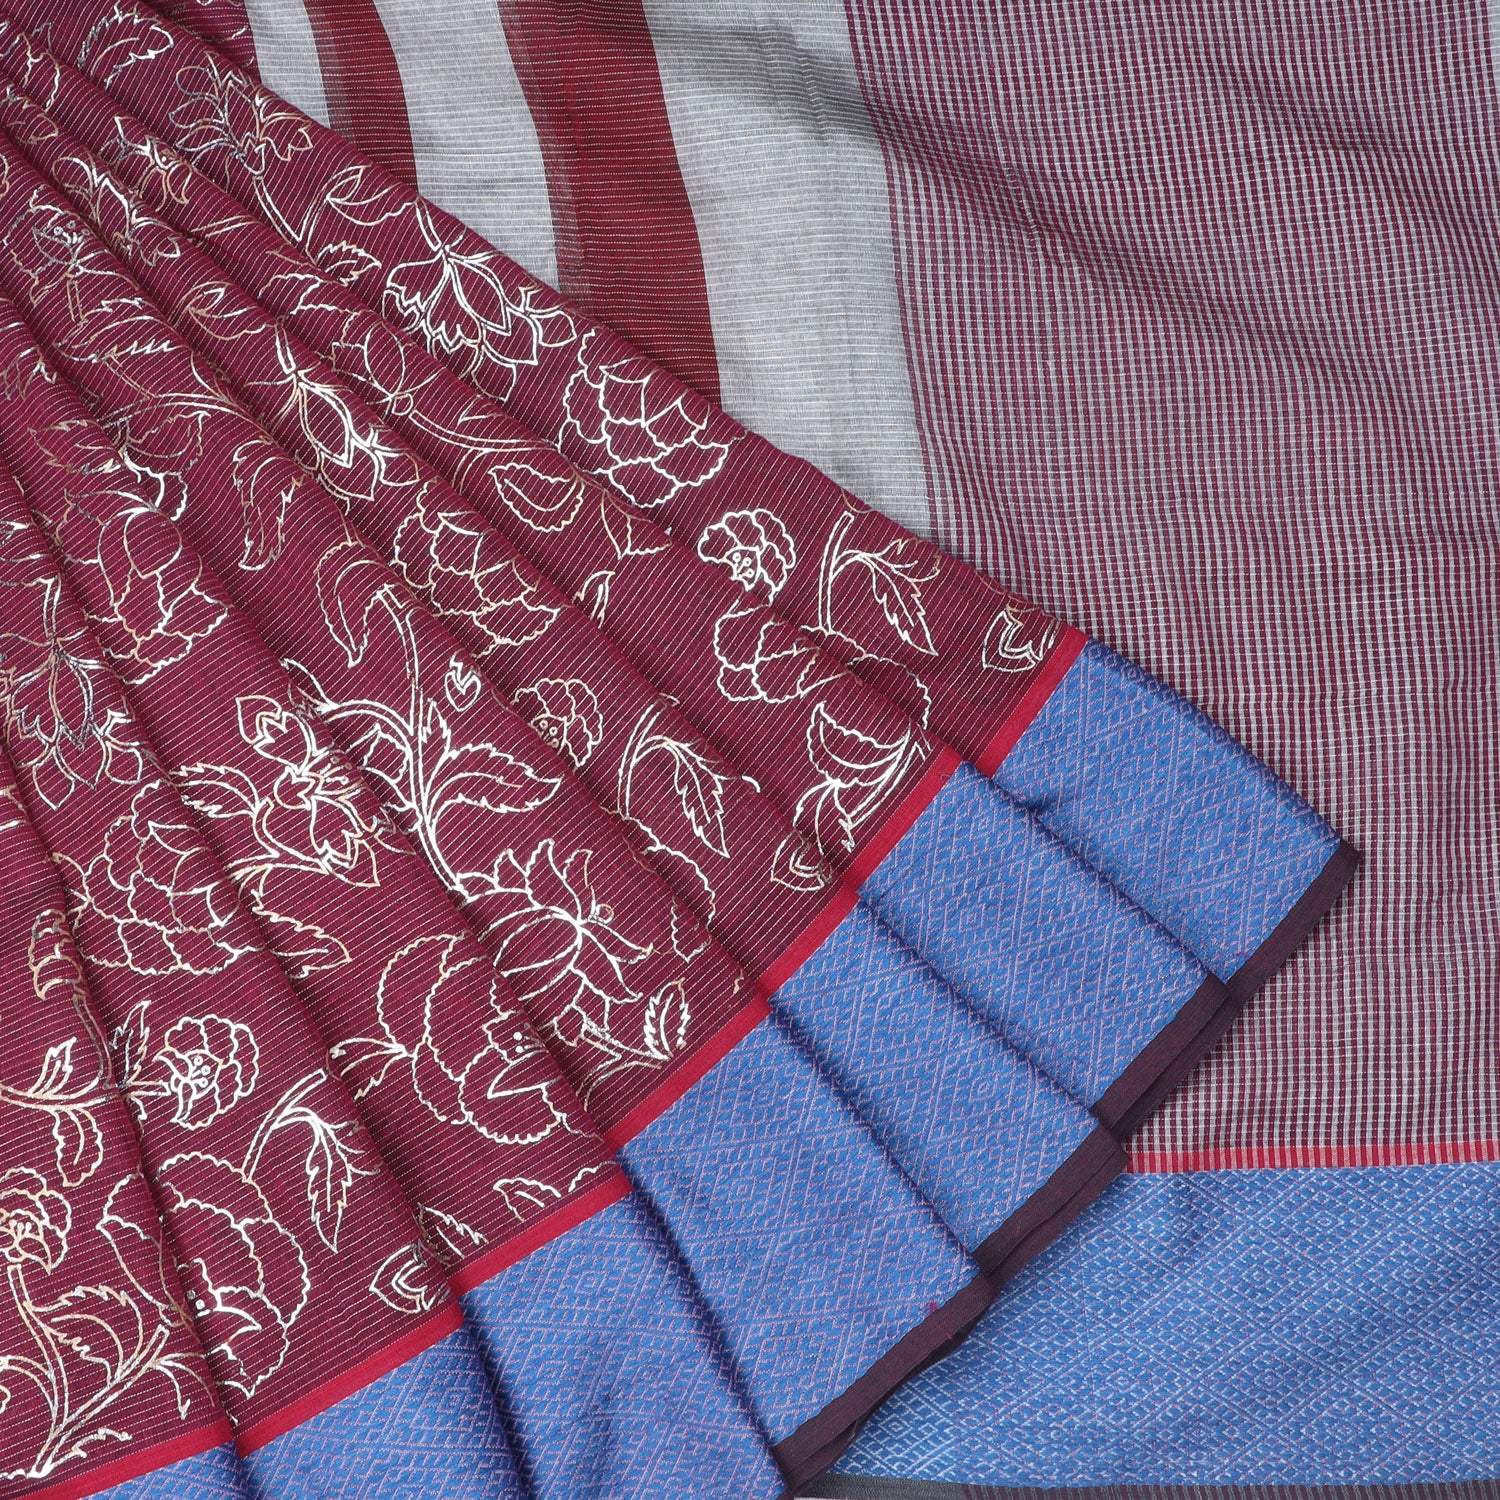 Brick Red Cotton Saree With Foil Printed Motifs - Singhania's